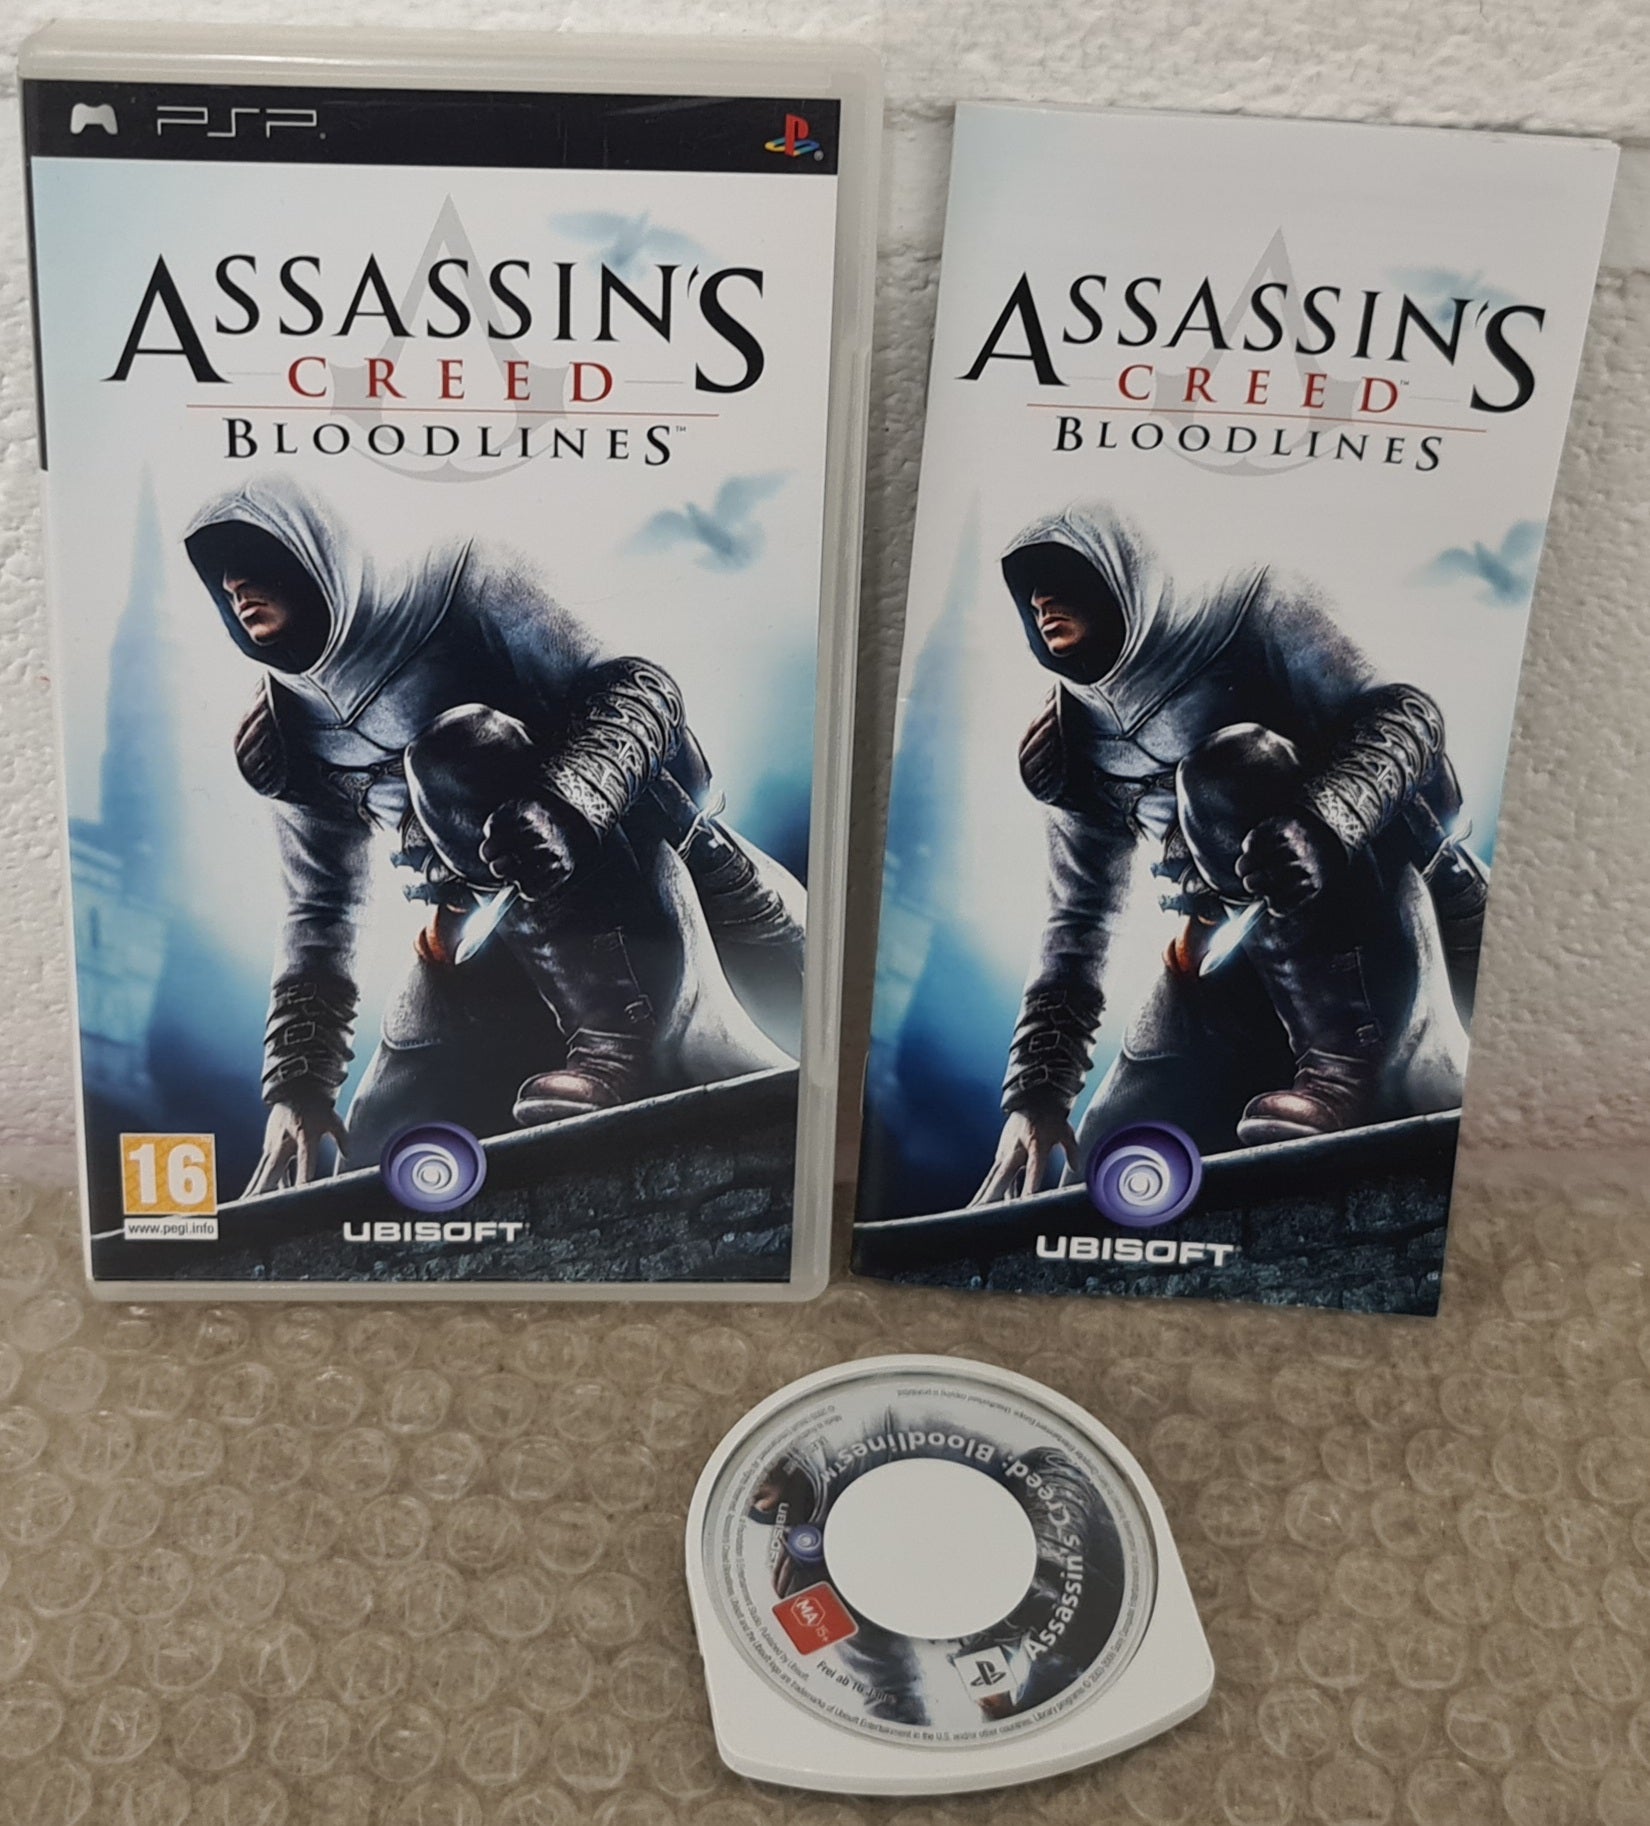 assassins creed bloodlines worth playing